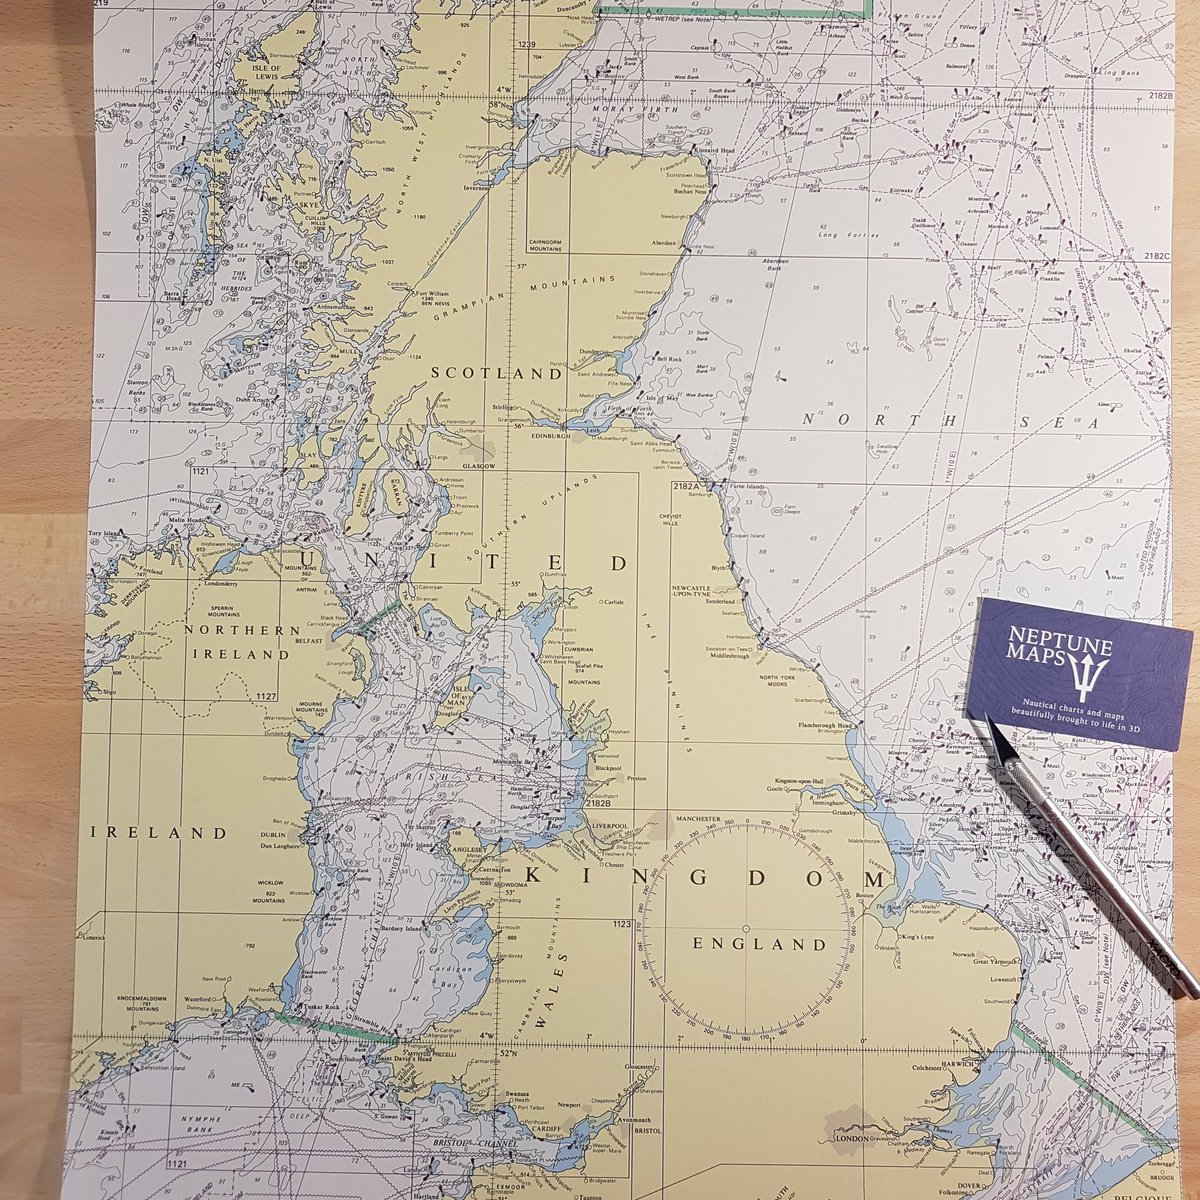 So excited to be working on 3D nautical chart of the British Isles! My home country. :-) #UK #sailing #yacht #nautical #nauticalcharts